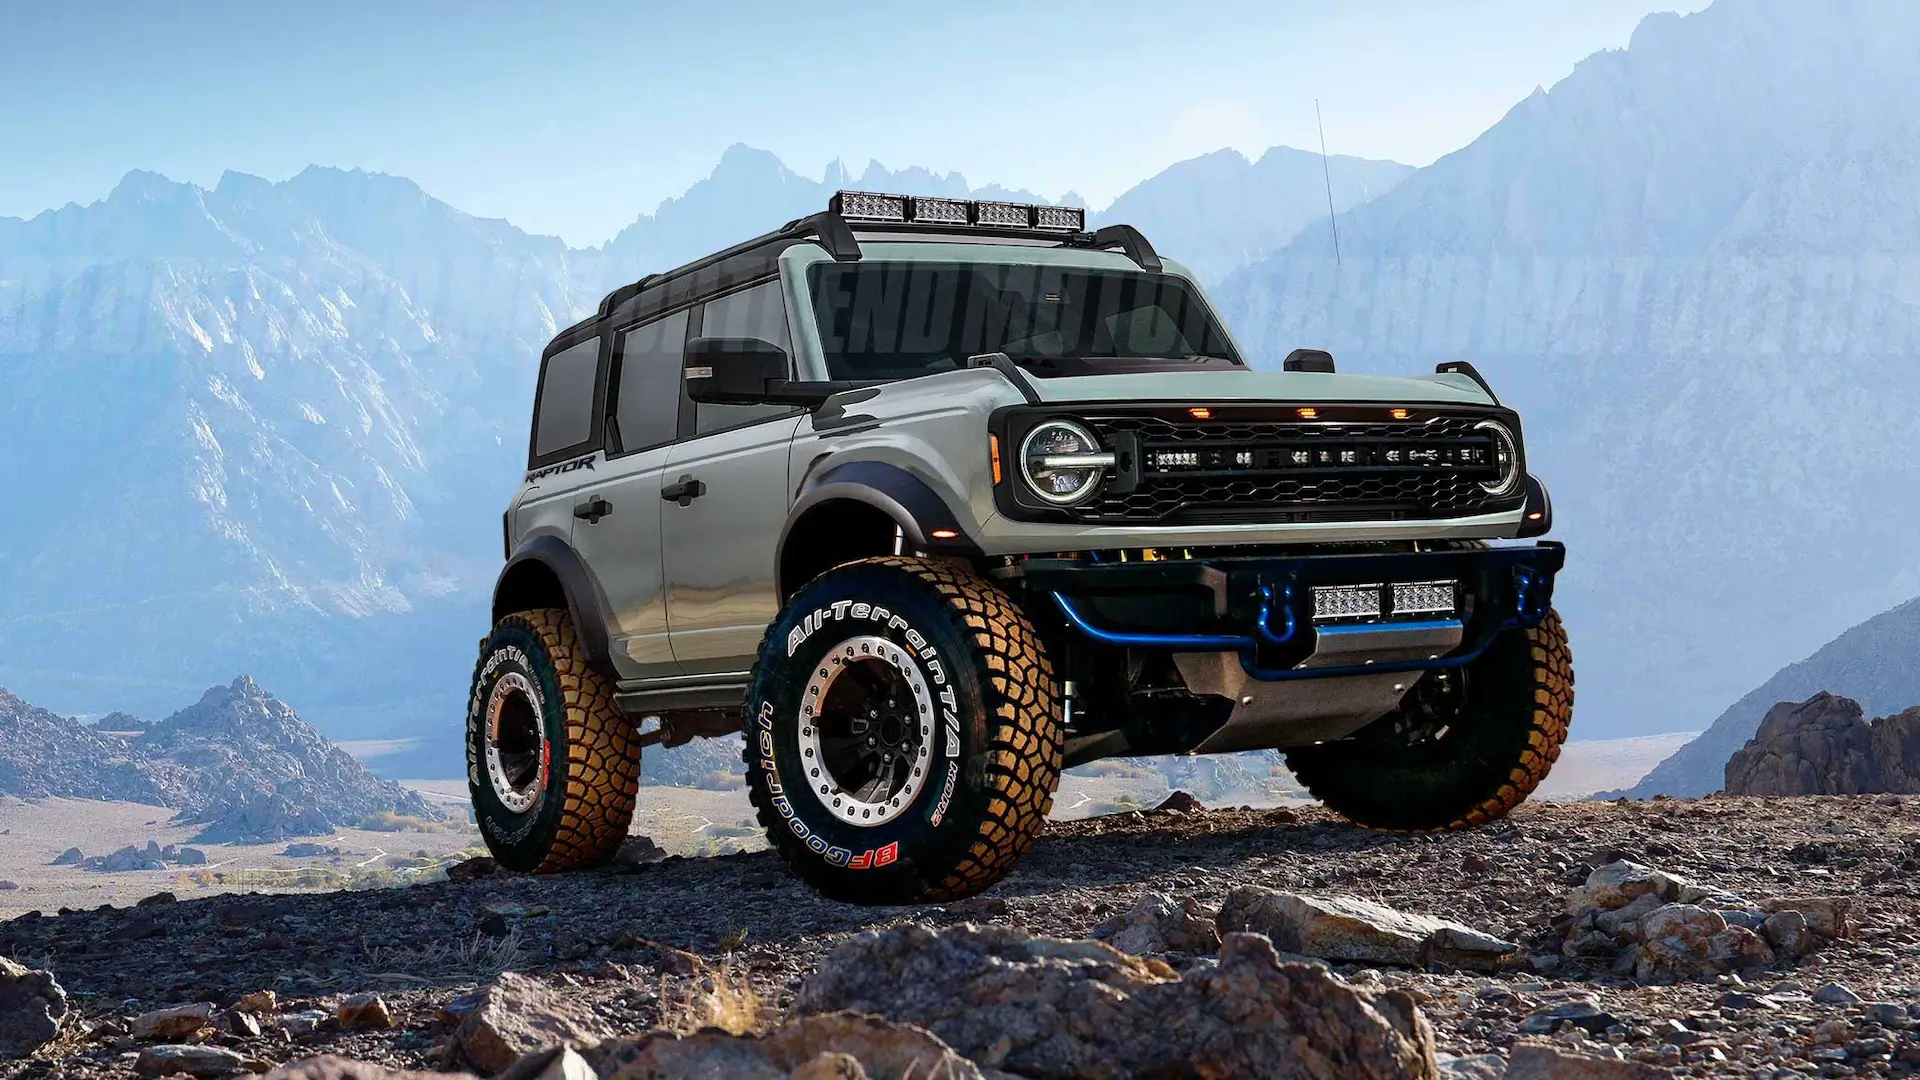 2022 Ford Bronco Images